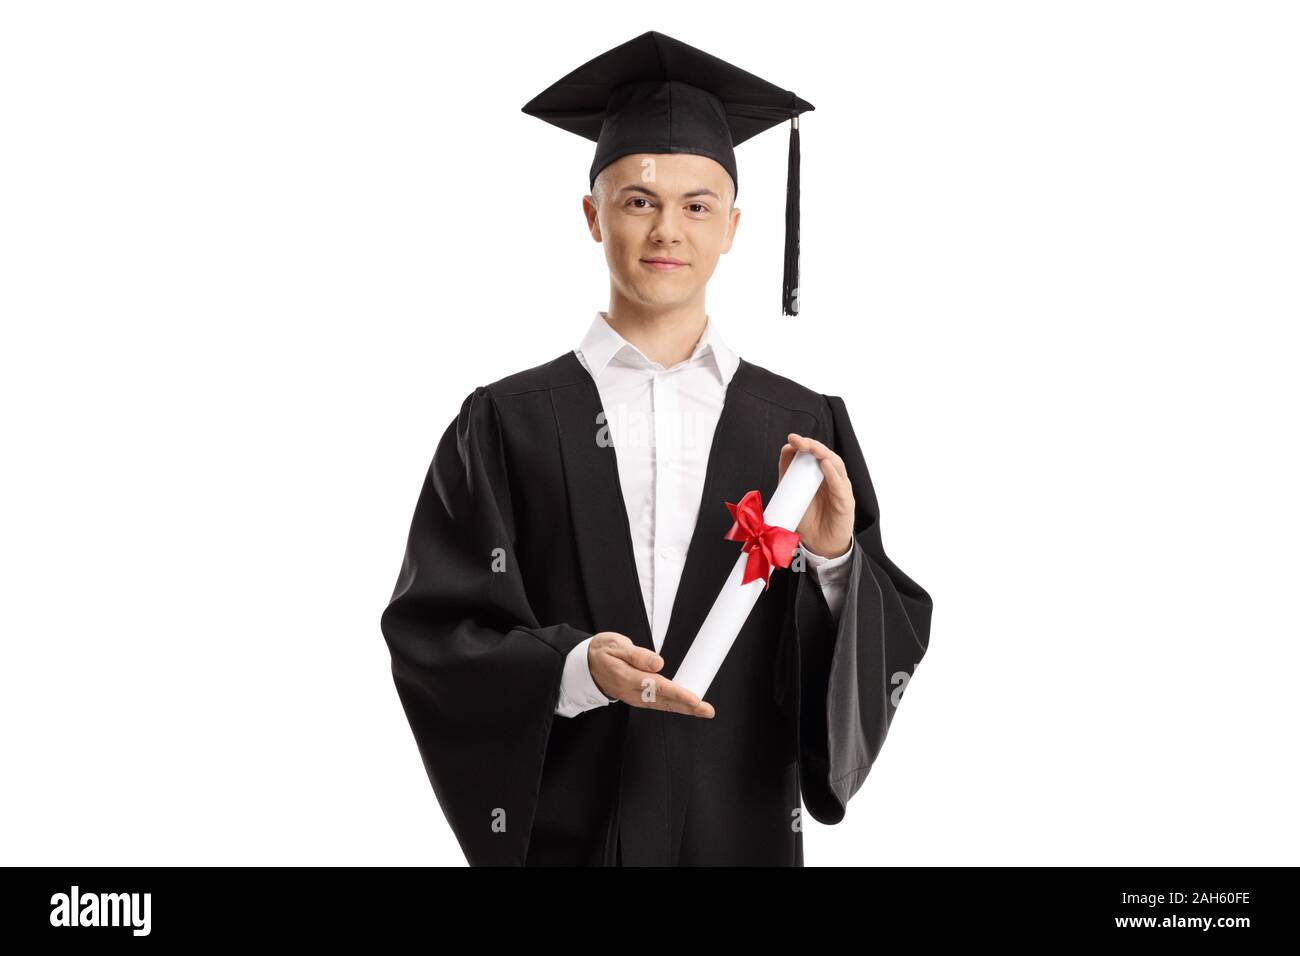 Male student in a graduation gown holding a diploma isolated on white background Stock Photo